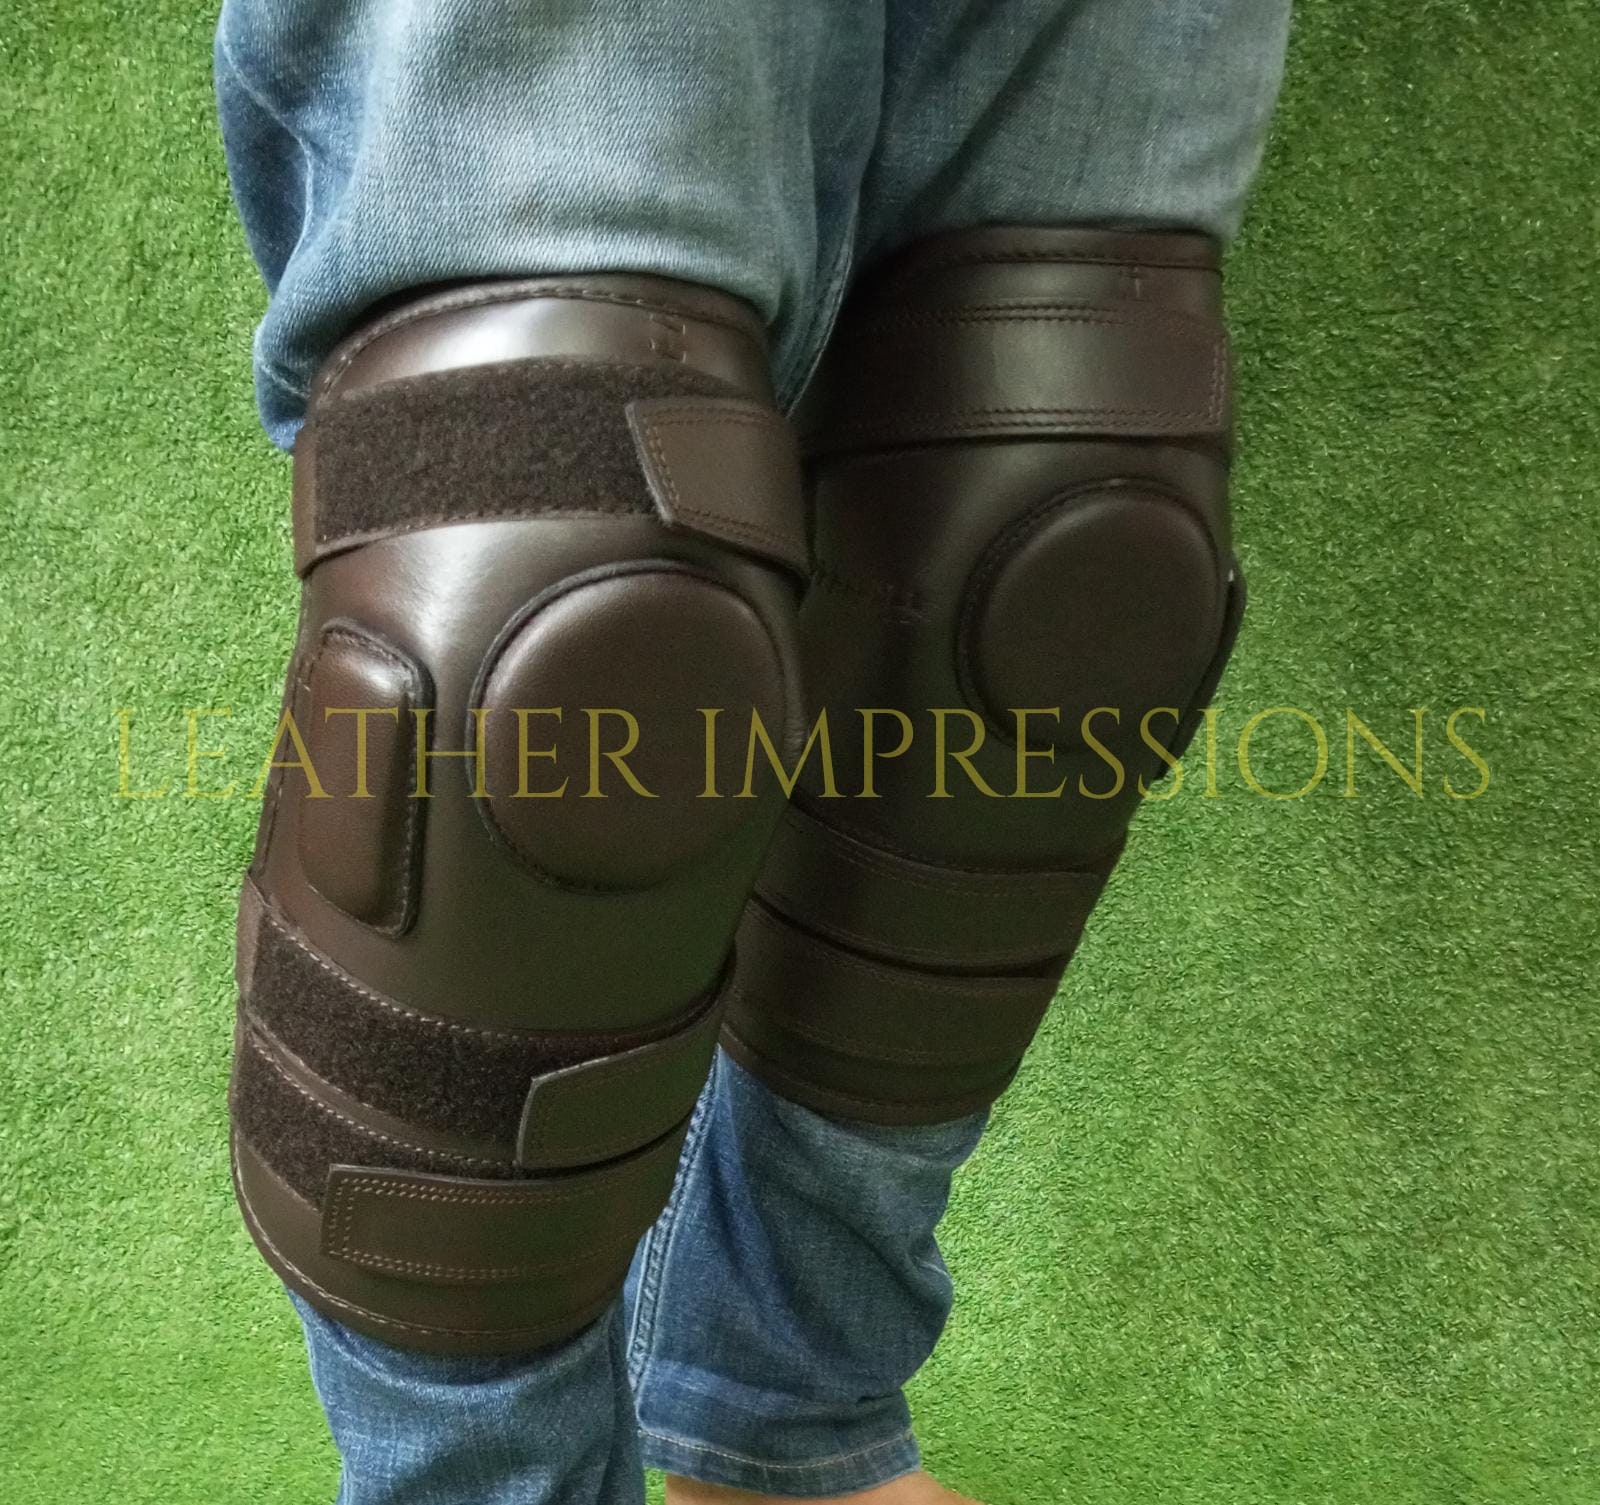 POLO RIDING KNEE GUARDS 3 STRAPS LEATHER PADDED SUPREME QUALITY FREE P&P UK 